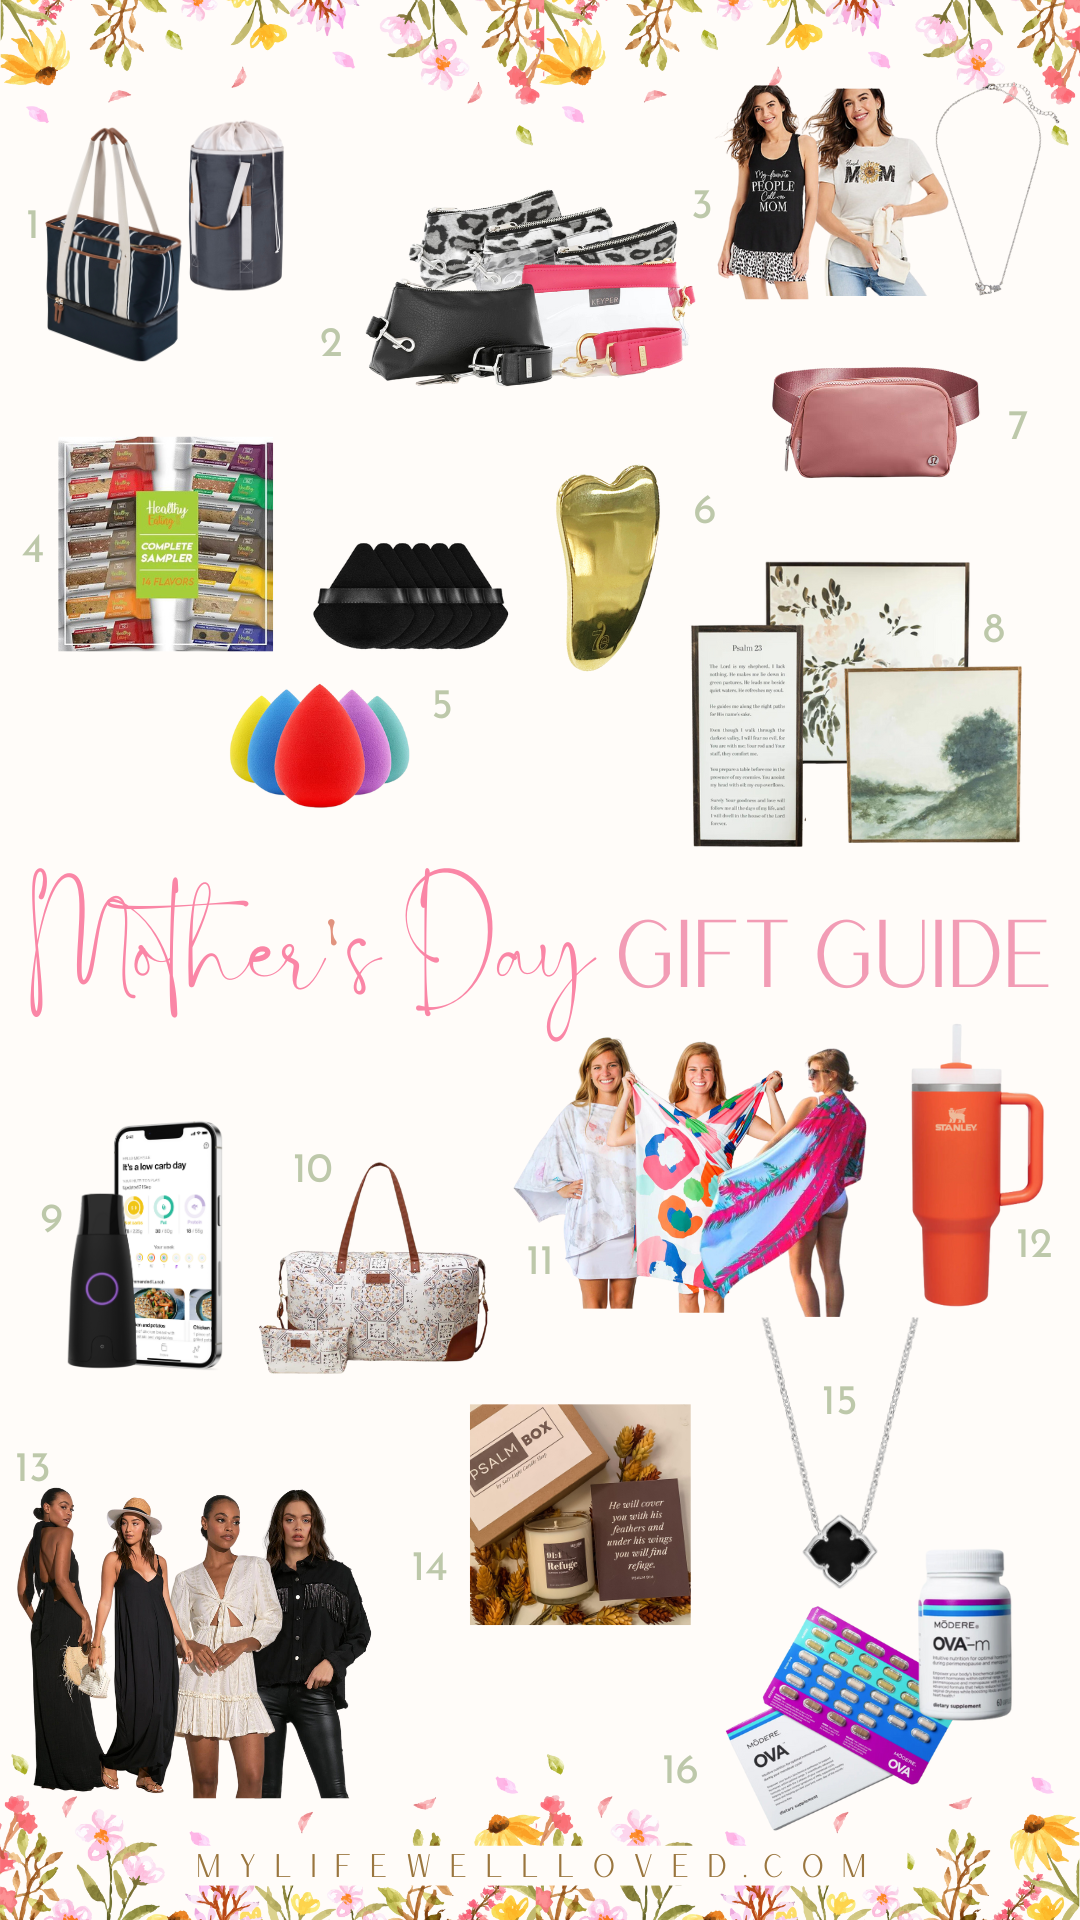 Christian Birmingham podcaster, boy mom, & health coach, Heather Brown from My Life Well Loved, shares Mother's Day gift ideas for the mom prioritizing mind, body and spirit. 